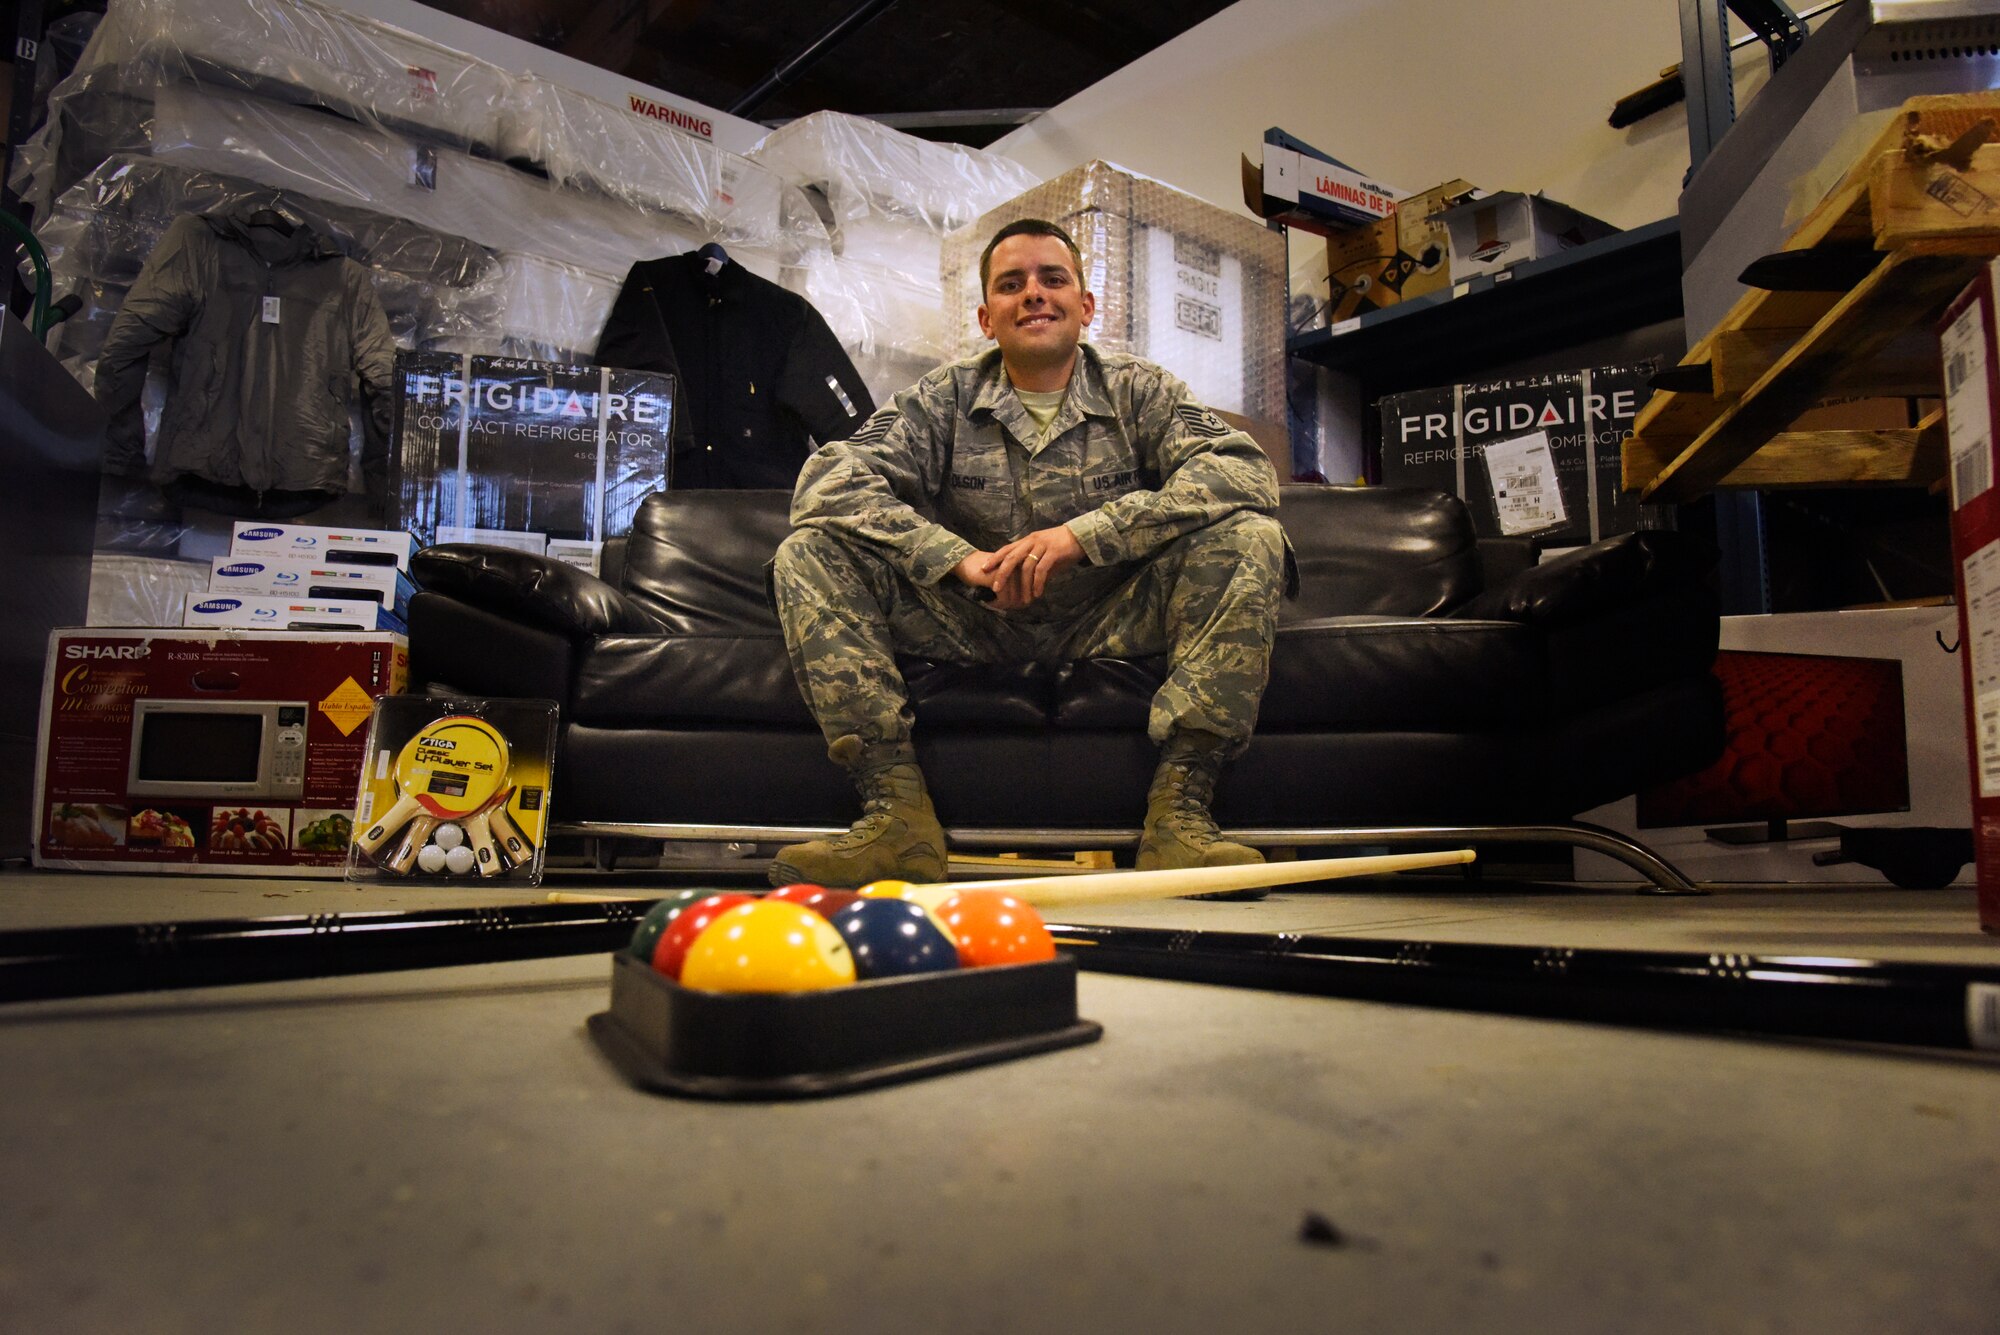 Tech. Sgt. Lee Olson, 341st Operations Group supply coordinator, poses for a photograph at the OG supply warehouse on Oct. 20. As part of his duties, Olson orders, inventories, stores, distributes and logs all Force Improvement Program related items, as well as every-day supplies.  (U.S. Air Force photo/Airman 1st Class Collin Schmidt) 